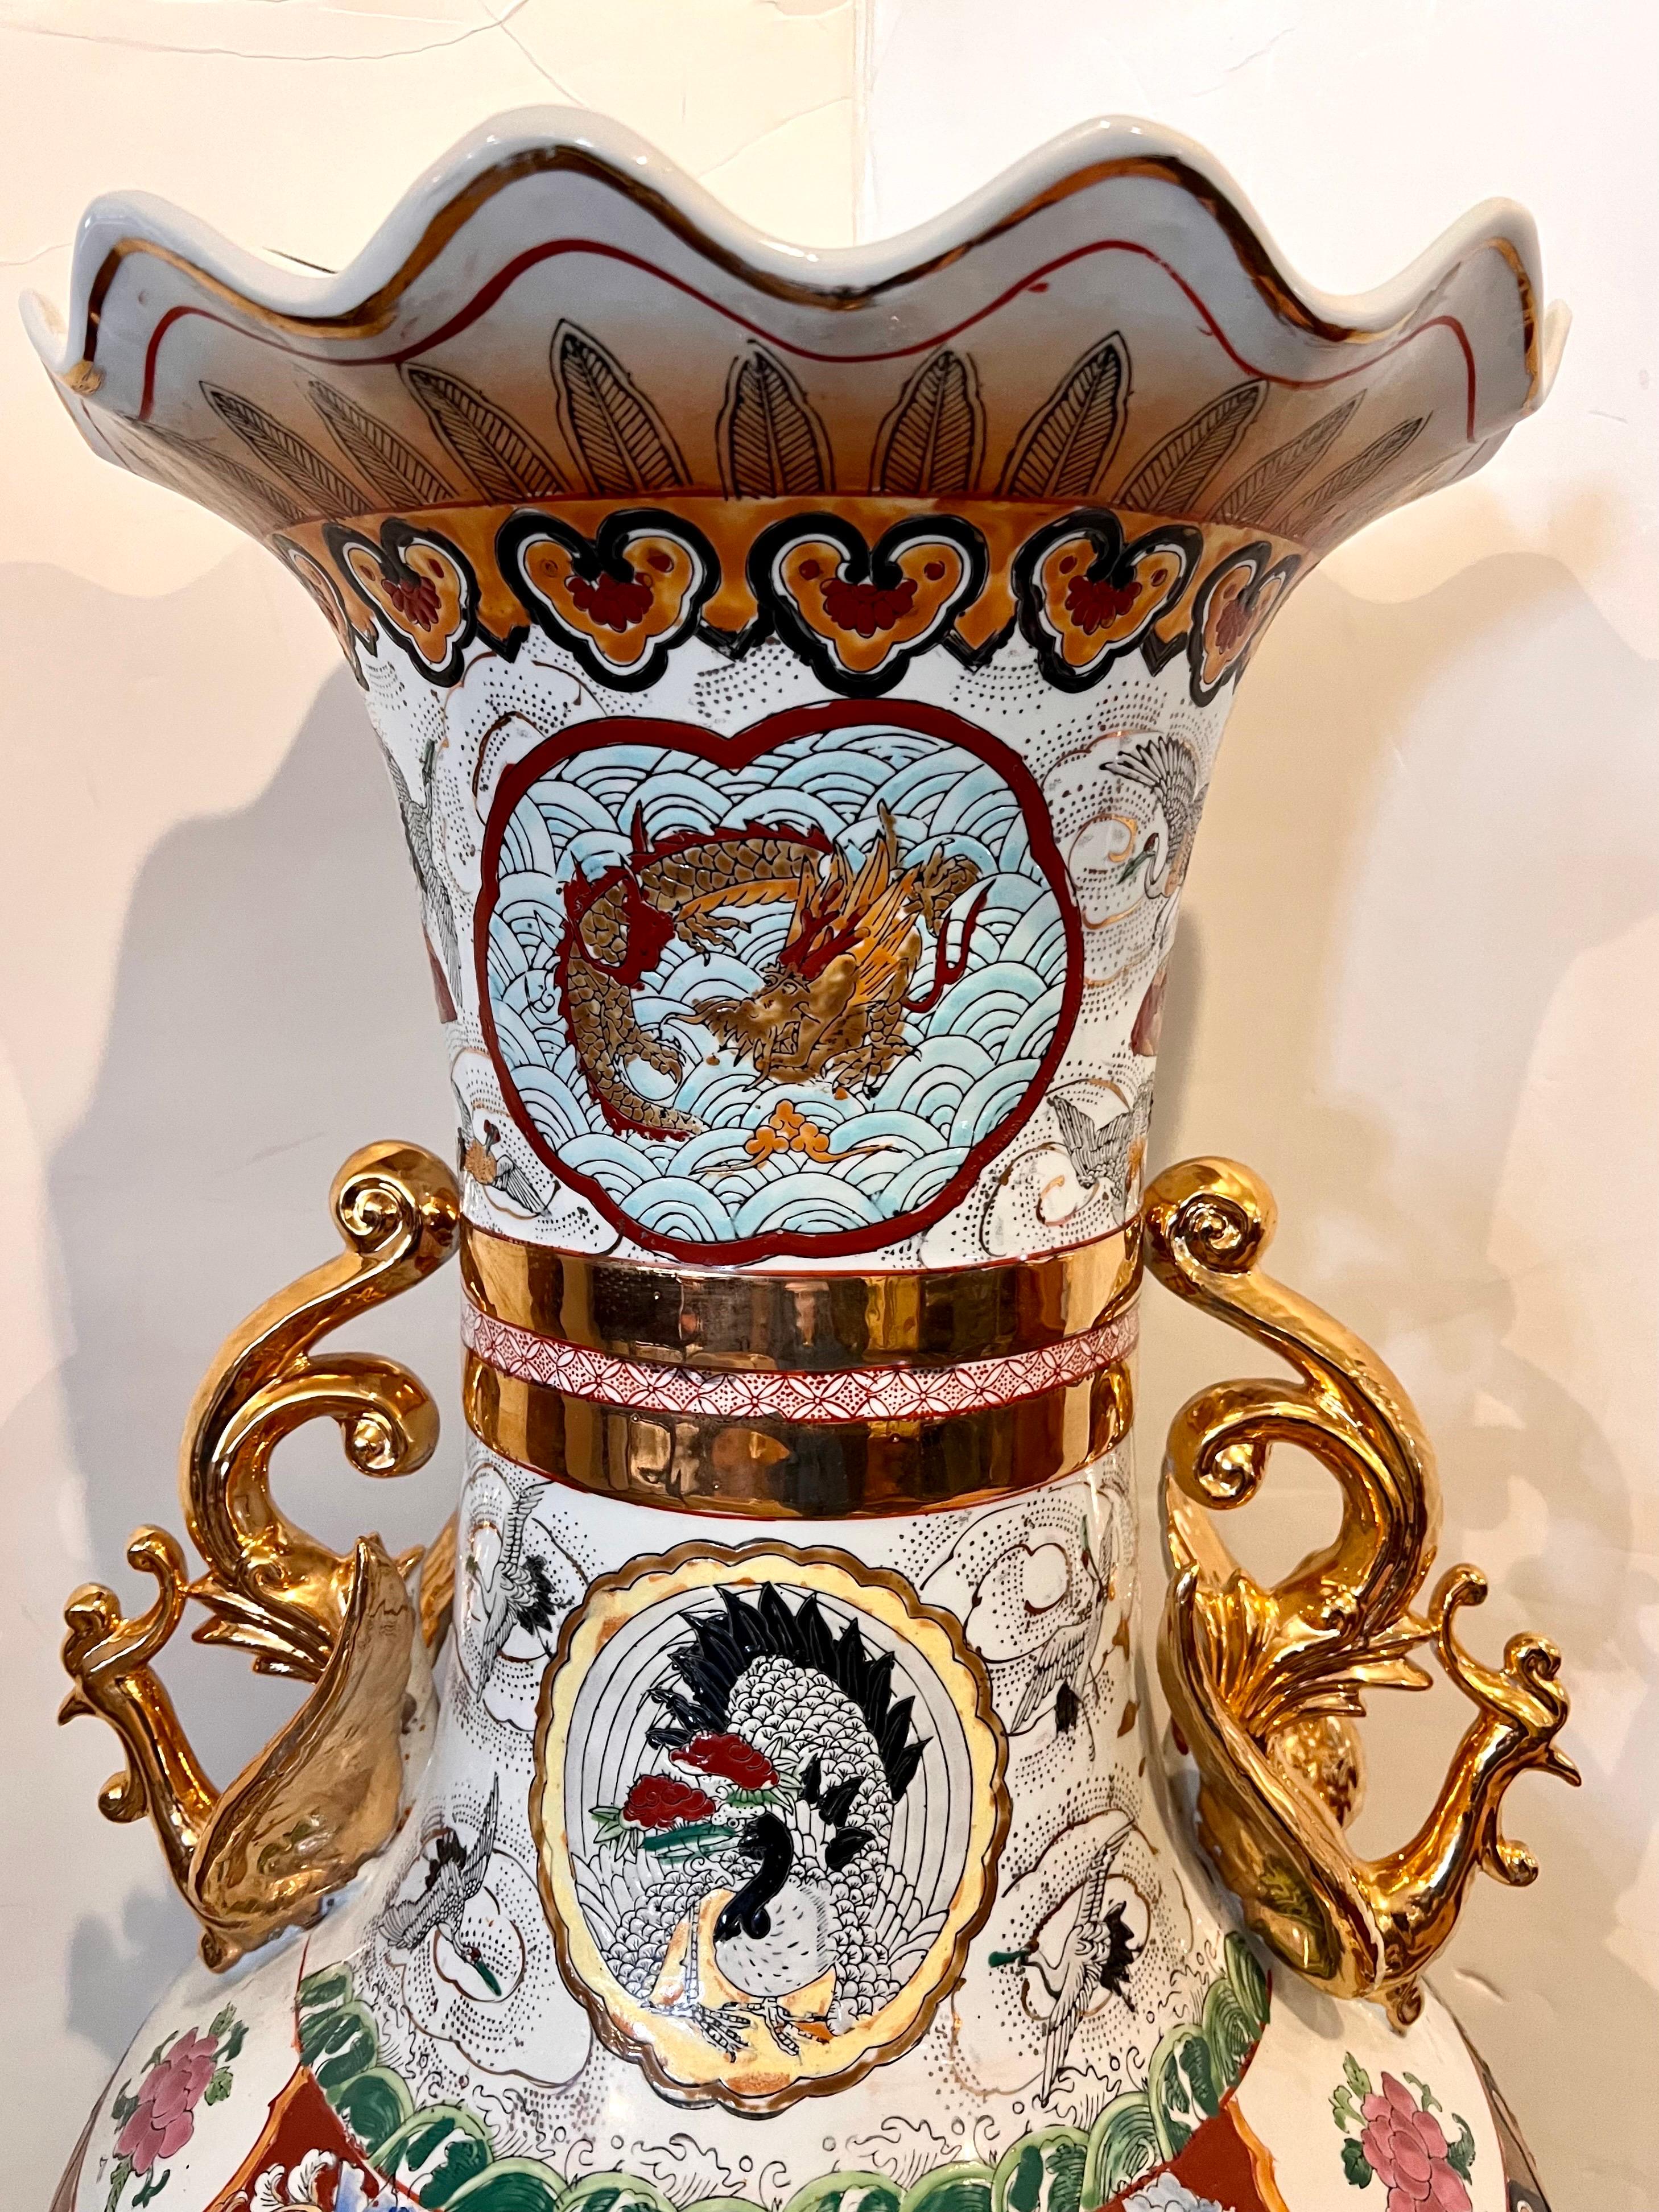 Extra large Chinese porcelain vase decorated with bright florals on a white ground with panels of colorful landscape scenery. The neck is decorated with applied gold phoenix birds underneath scalloped mouth rim. No hallmarks at bottom.